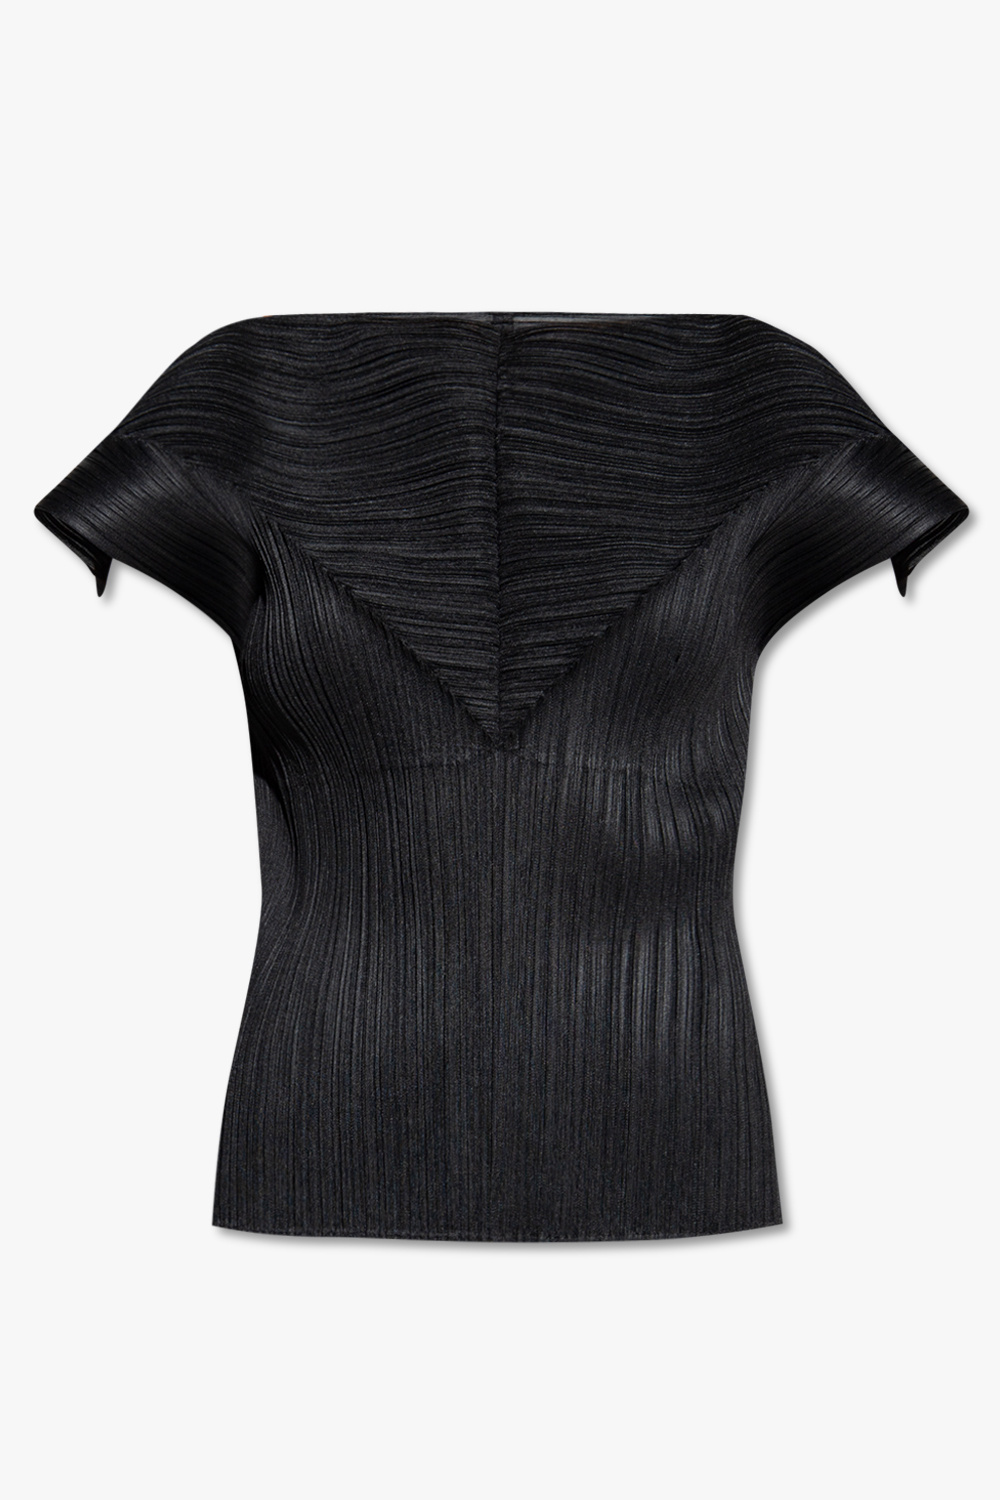 Black pleated top with straps and a decorative draped neckline from Issey Miyake Pleats Please Frequently asked questions